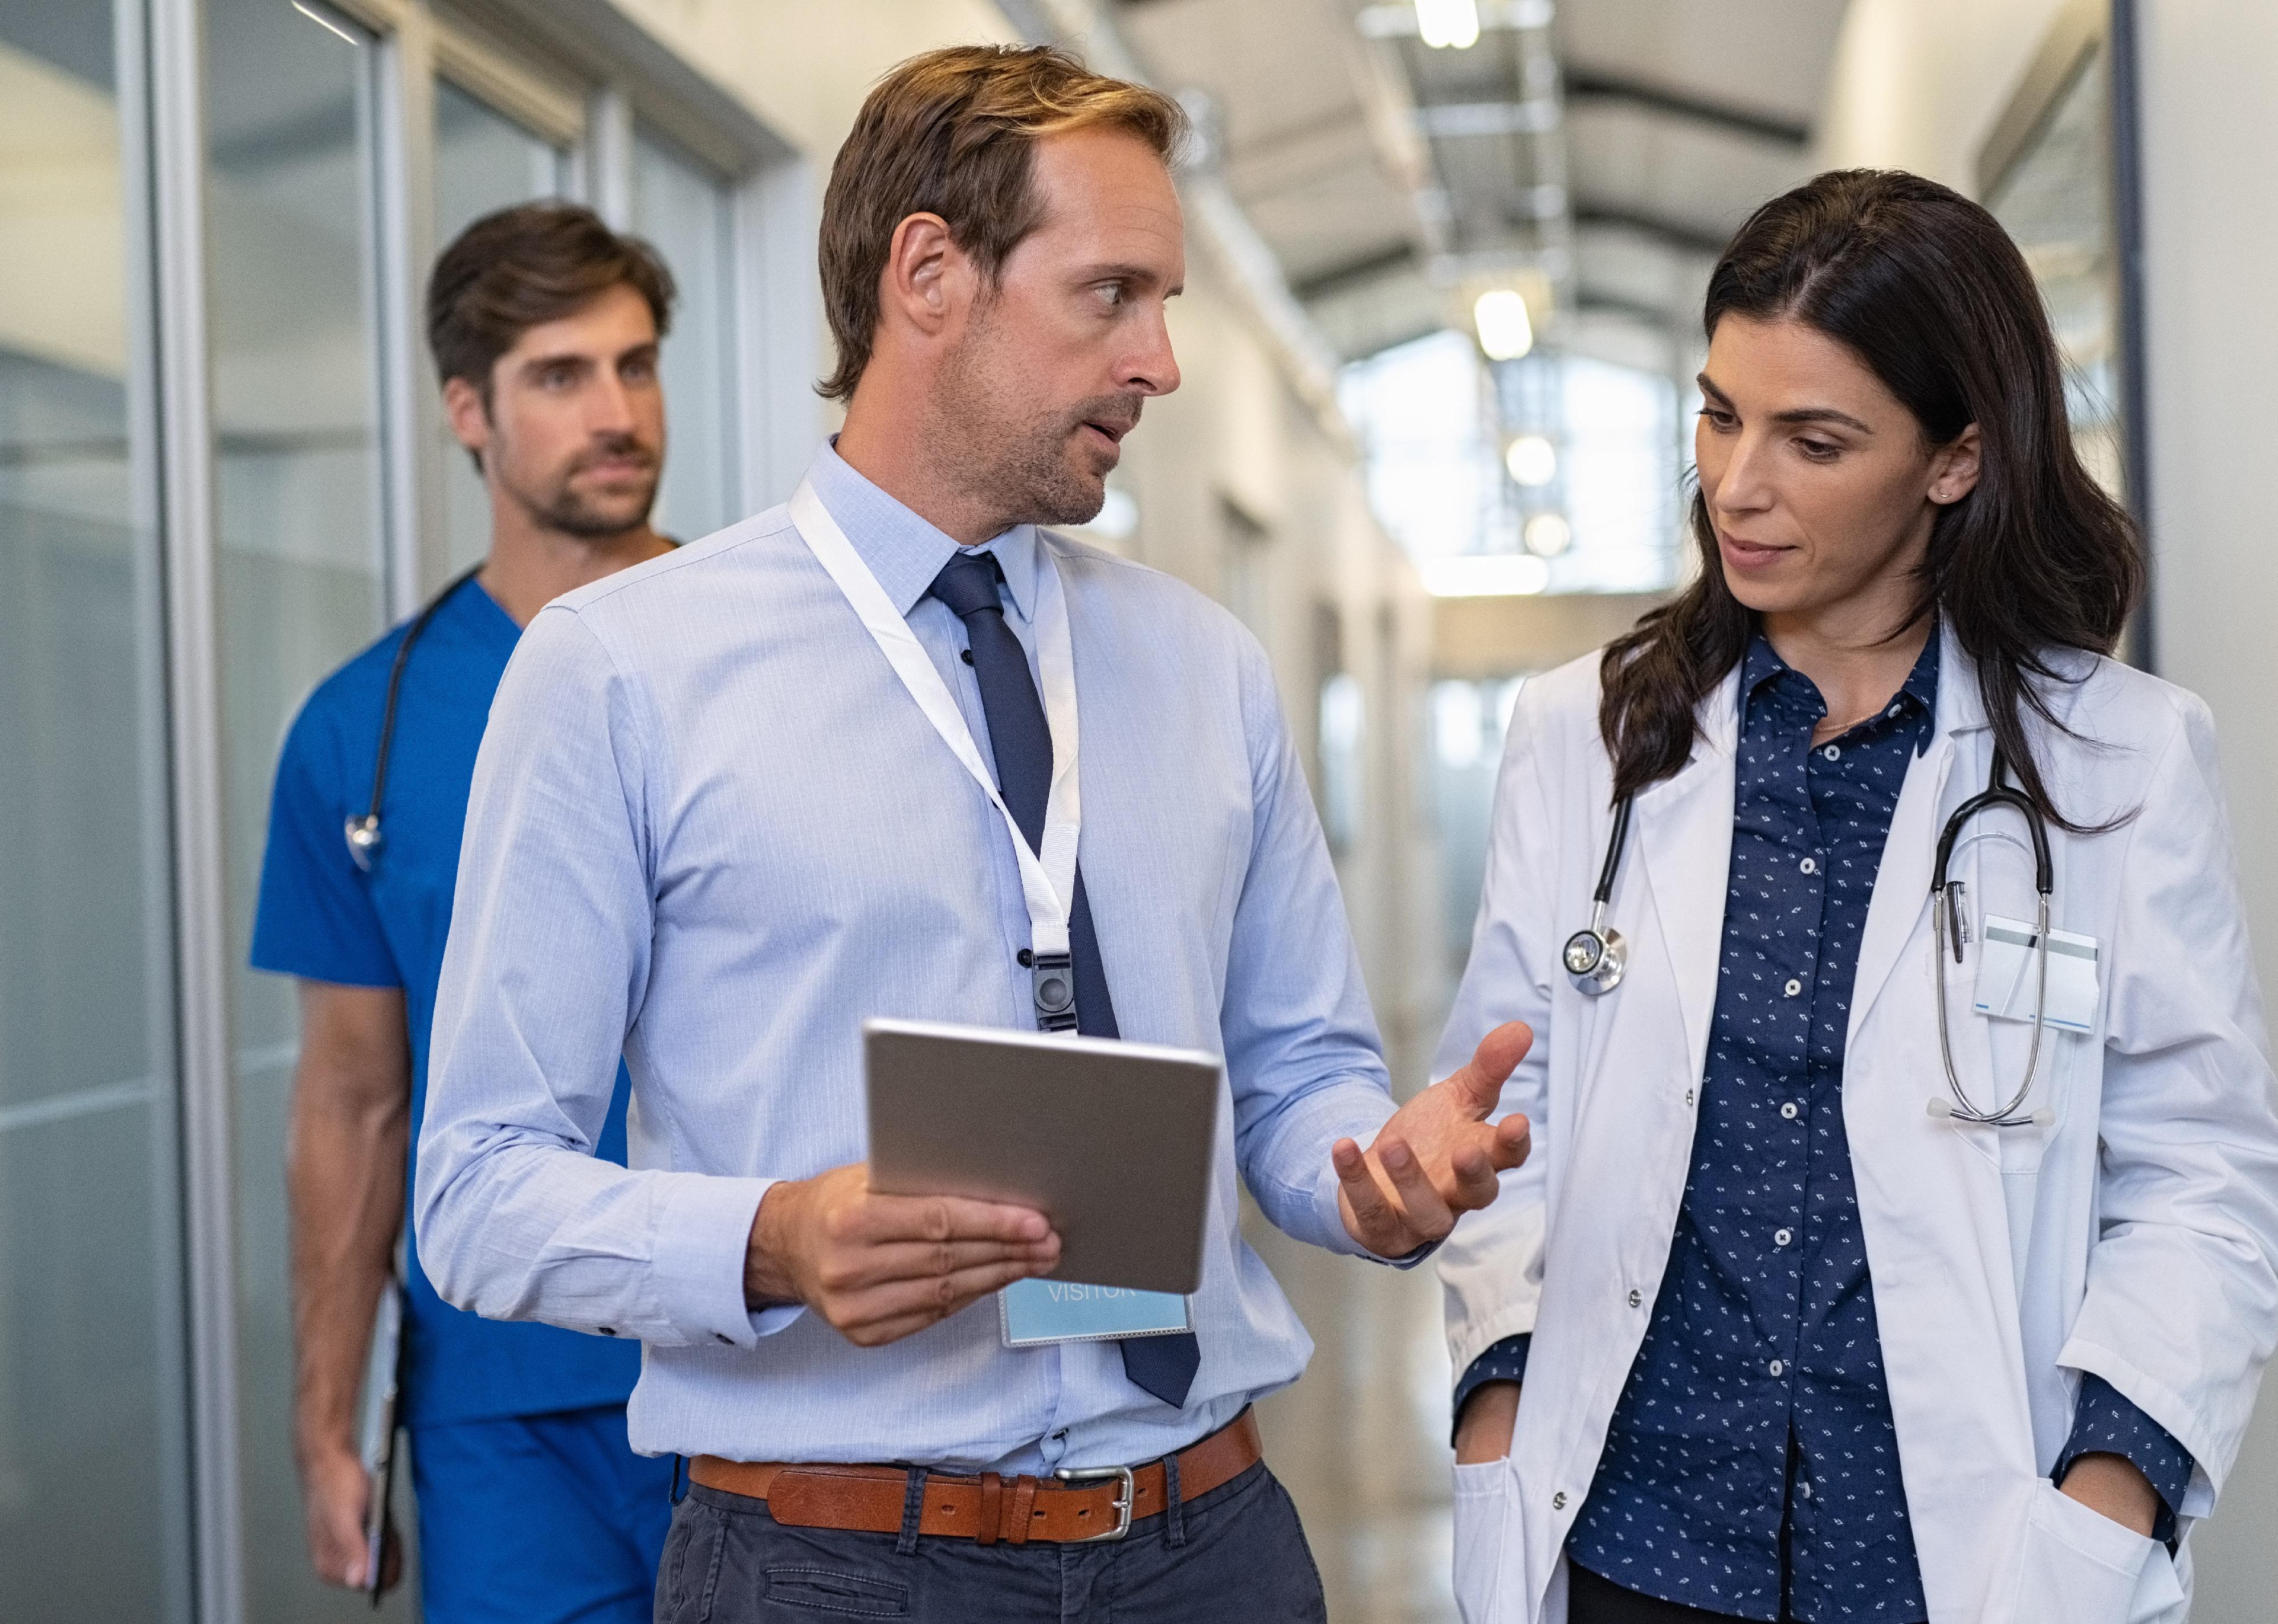 Male and female doctor having a discussion in  …
								<span class='morelink'><a href='/stories/roles-in-medicine-projected-to-have-the-greatest-shortages-by-2035,402598?'>more</a></span>

							</div>

						
							<div class='dateline'>

								
									<span itemprop=